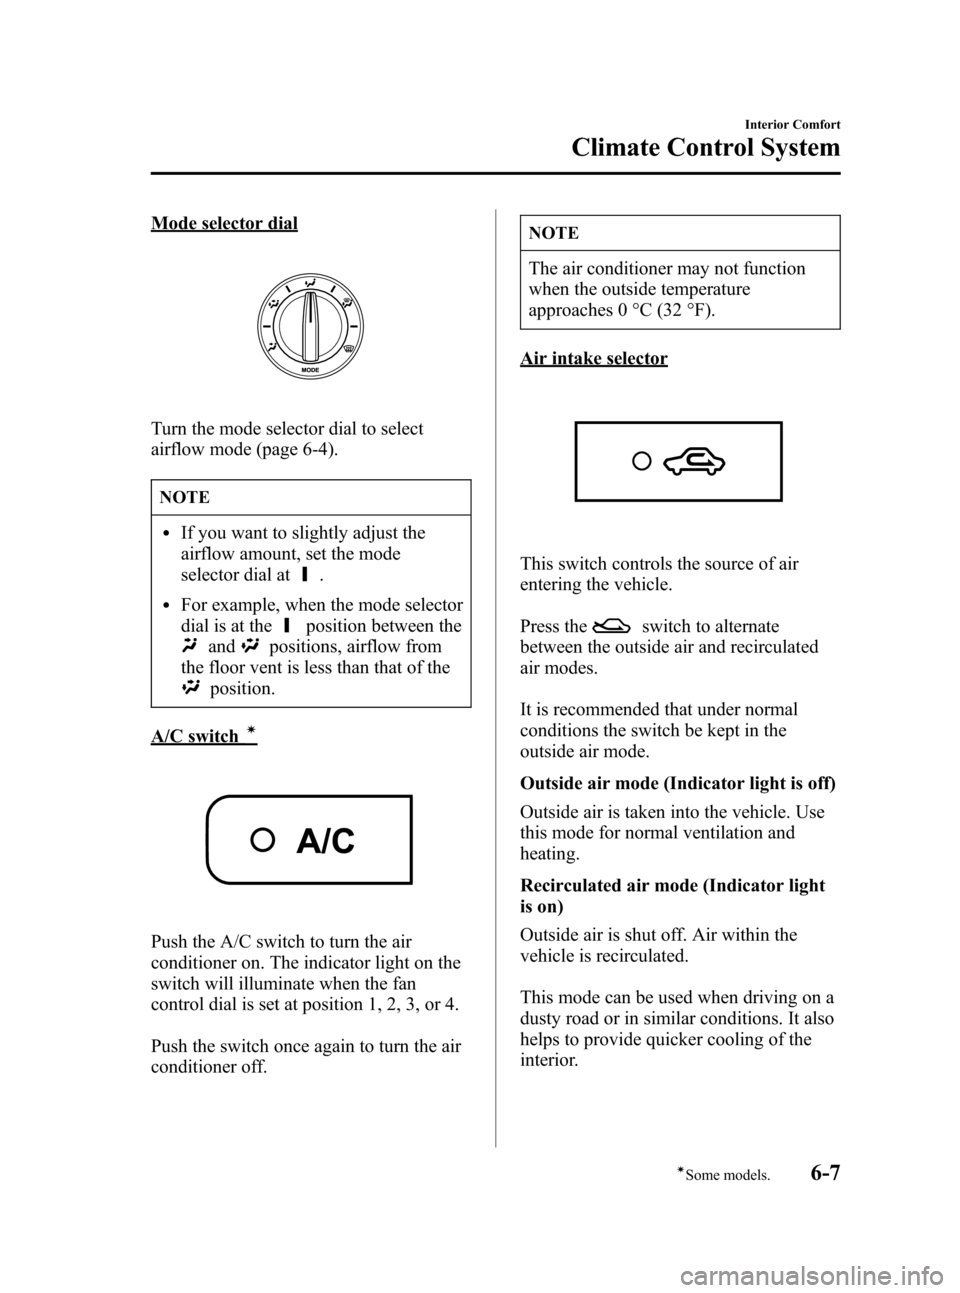 MAZDA MODEL 3 HATCHBACK 2007  Owners Manual (in English) Black plate (191,1)
Mode selector dial
Turn the mode selector dial to select
airflow mode (page 6-4).
NOTE
lIf you want to slightly adjust the
airflow amount, set the mode
selector dial at
.
lFor exam